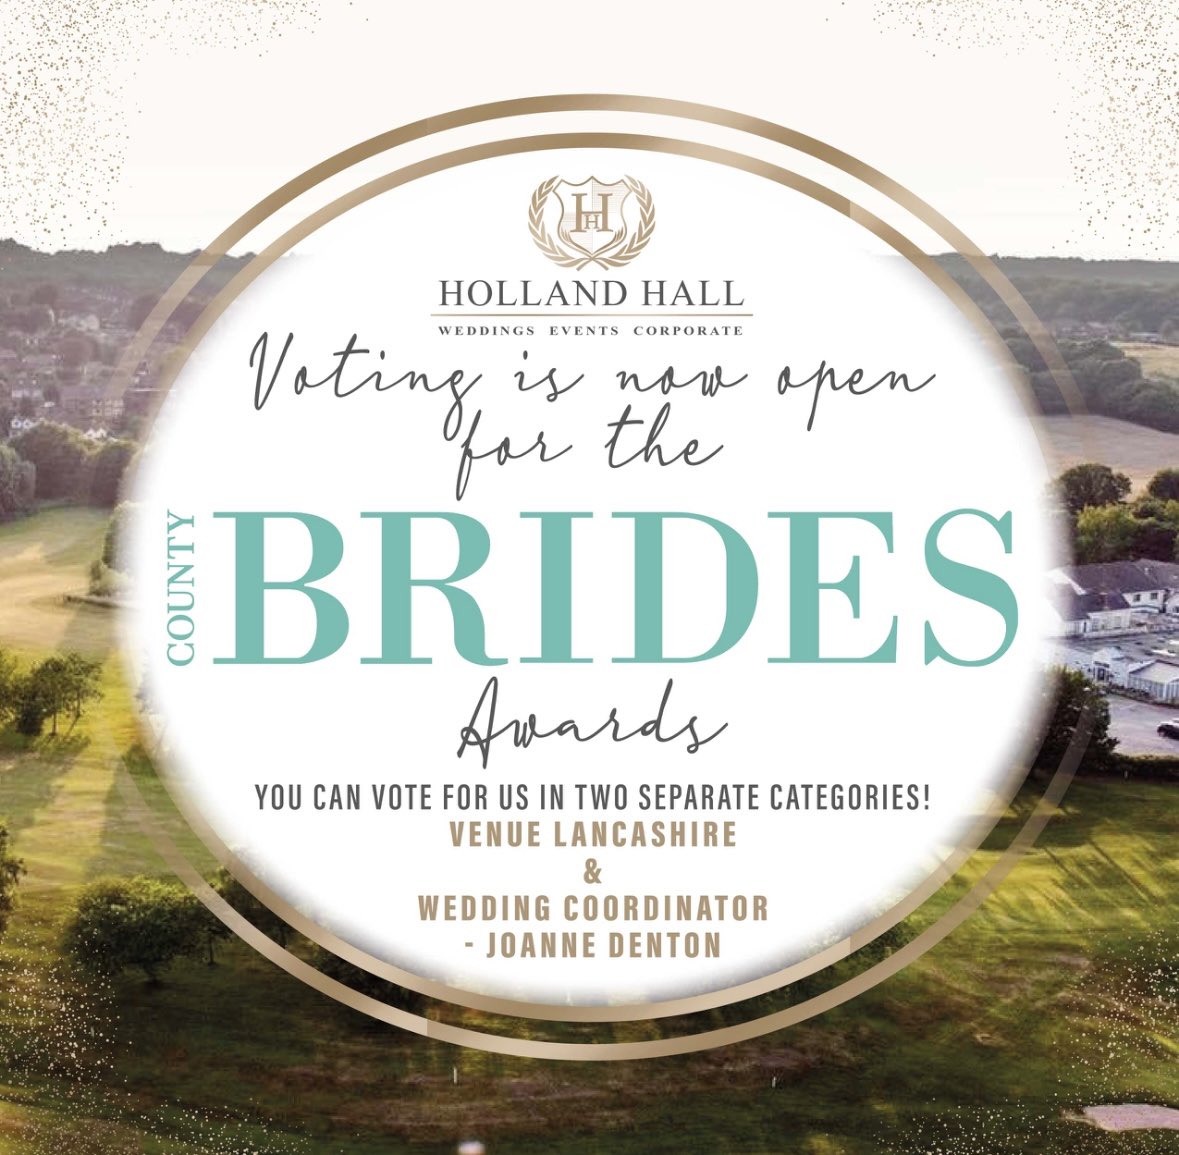 💍 To all our Holland Hall couples, VOTING IS NOW OPEN for The @countybridesltd North West Wedding Awards!

🏆 You can vote for us in two categories - Venue Lancashire & Wedding Coordinator - Joanne Denton.

🗳️ countybrides.com/awards/

#NWWA #NWWA24 #NorthWestWeddingAwards